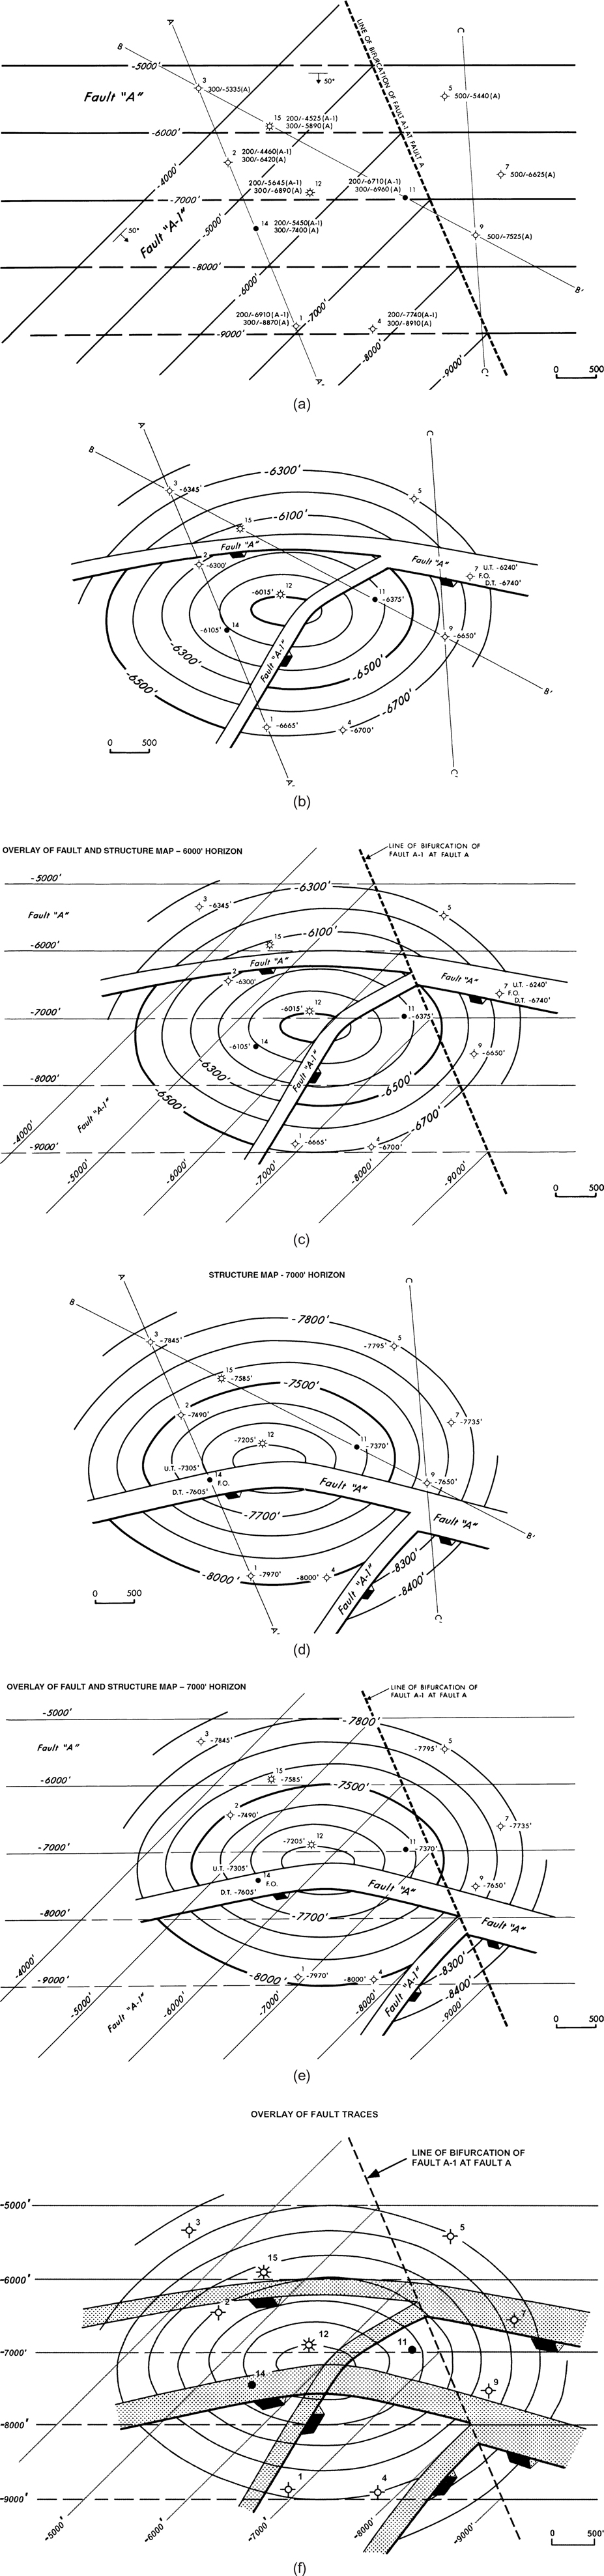 A figure showing the mapping techniques for the integration of the structure map and fault surface map.